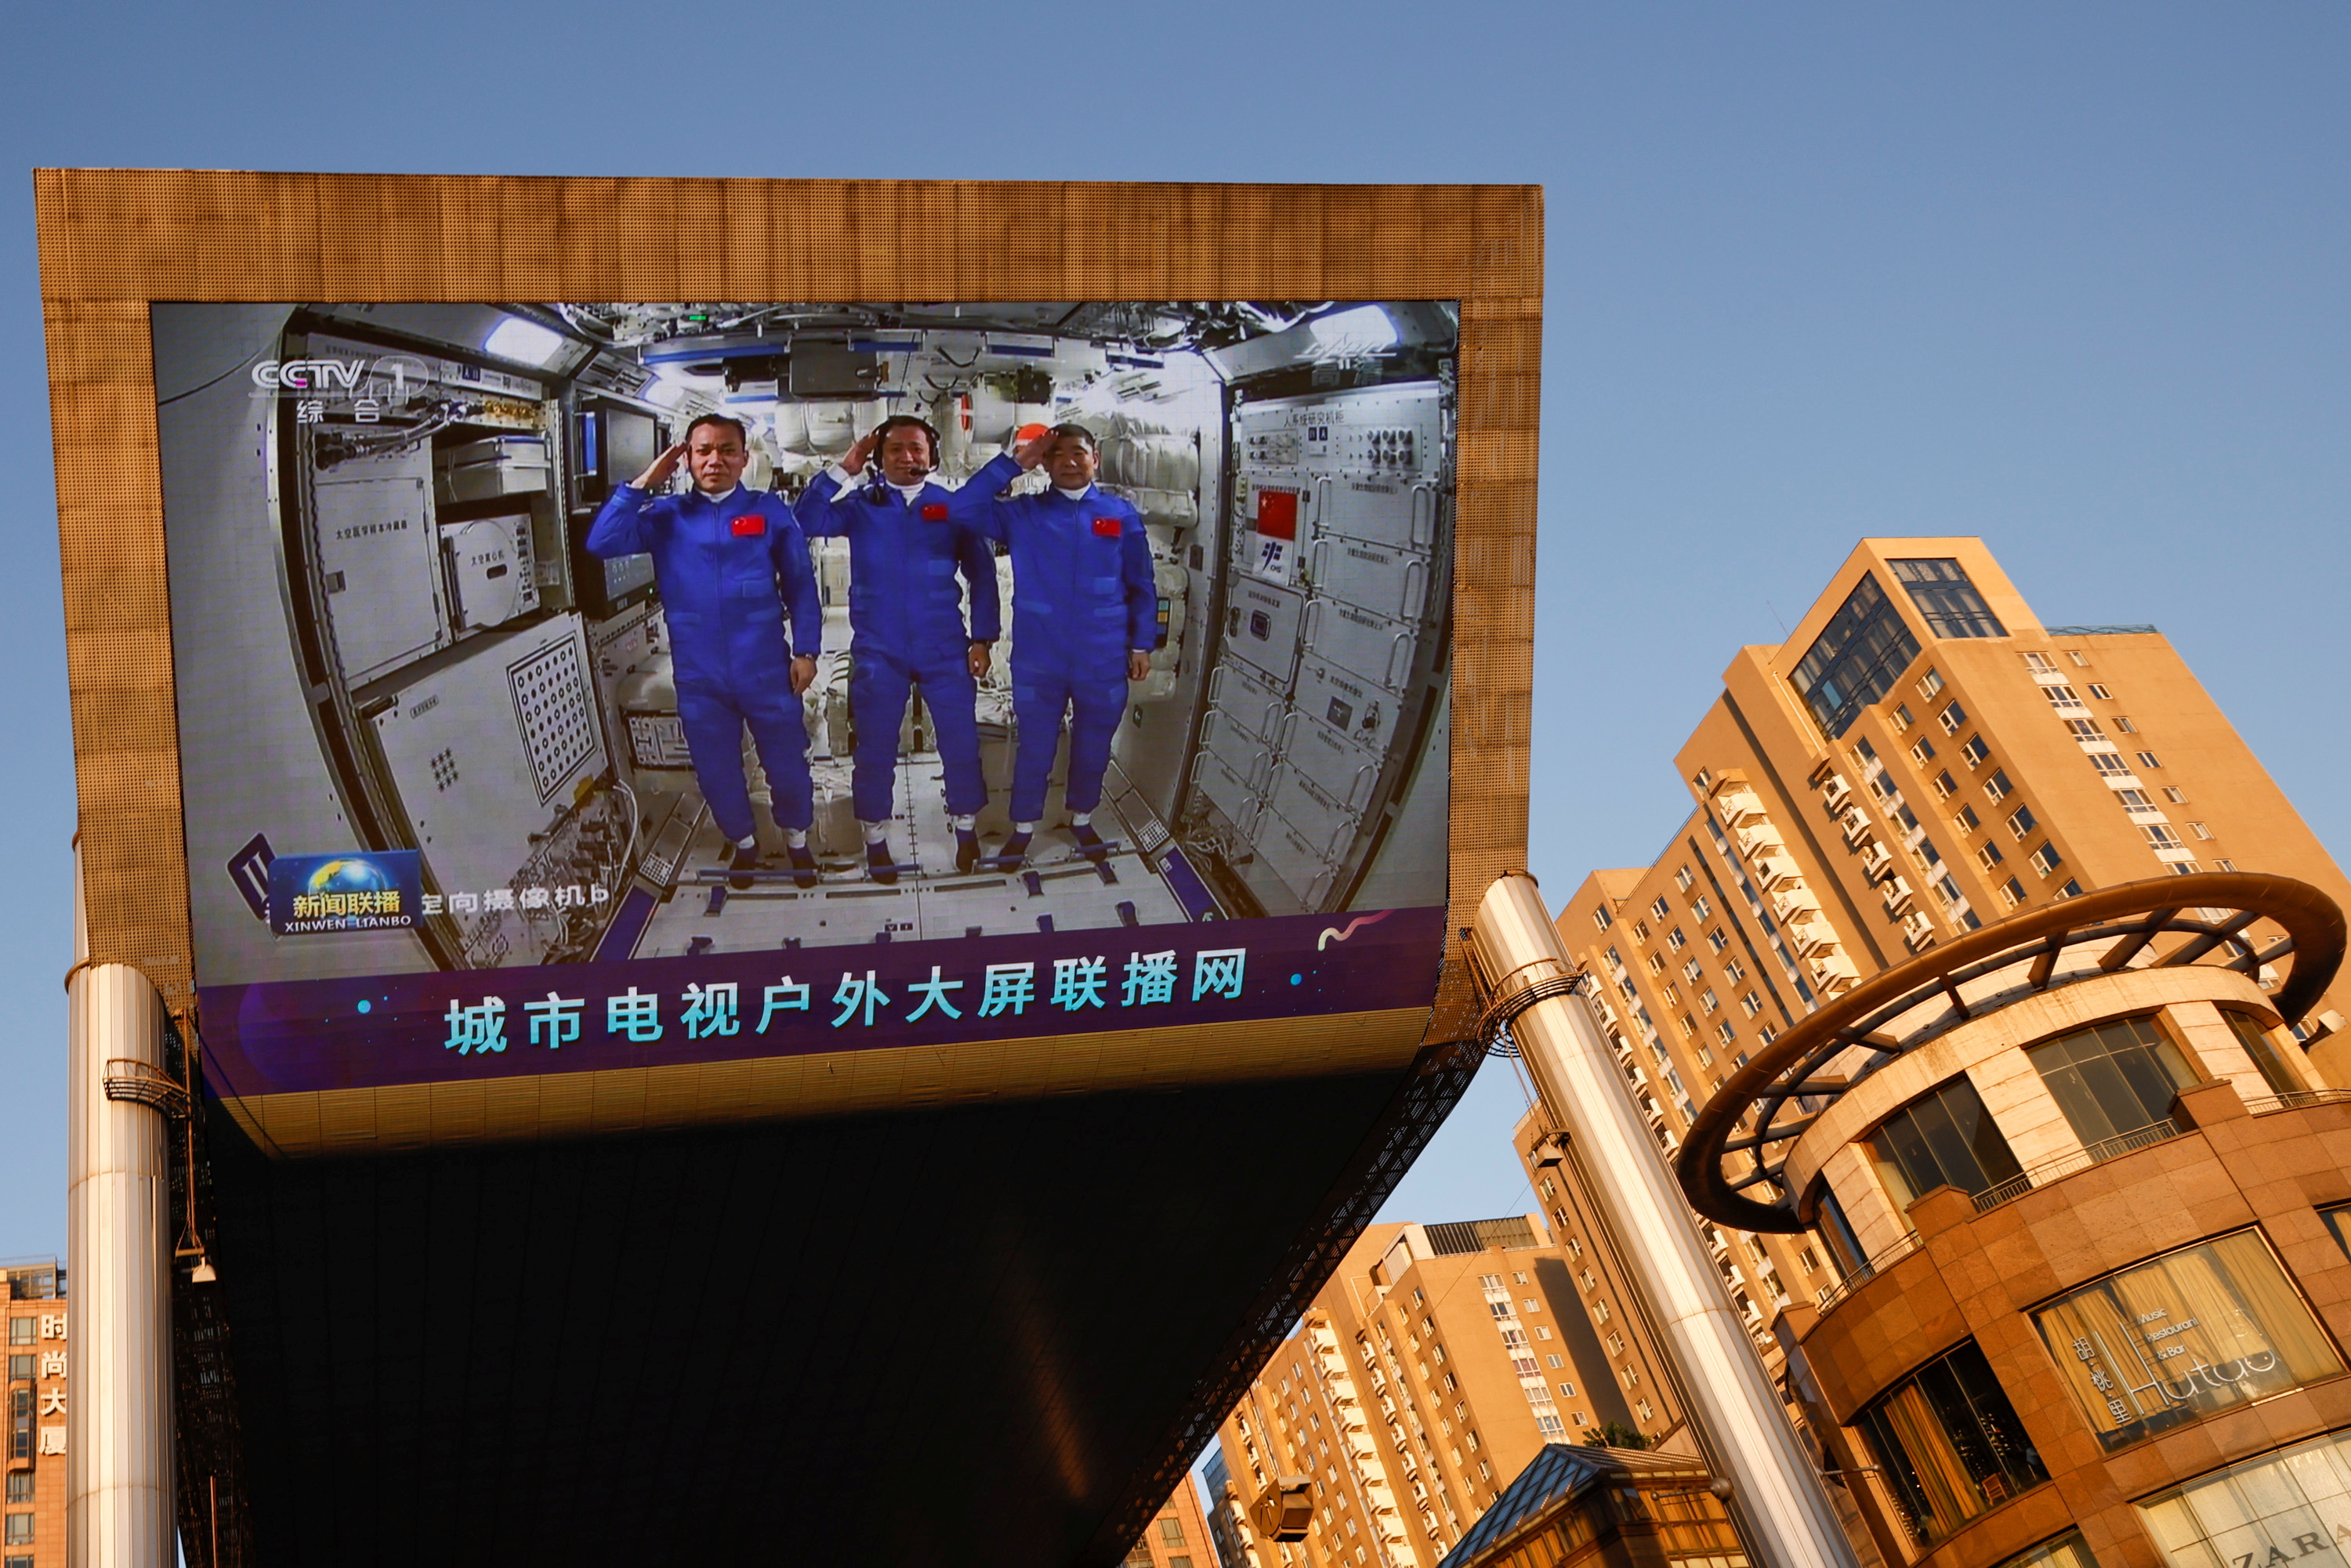 A giant screen shows Chinese astronauts Nie Haisheng (C), Liu Boming (R), and Tang Hongbo of the Shenzhou-12 mission saluting inside the Tianhe core module of China's space station, at a shopping mall in Beijing, China June 18, 2021. REUTERS/Thomas Peter